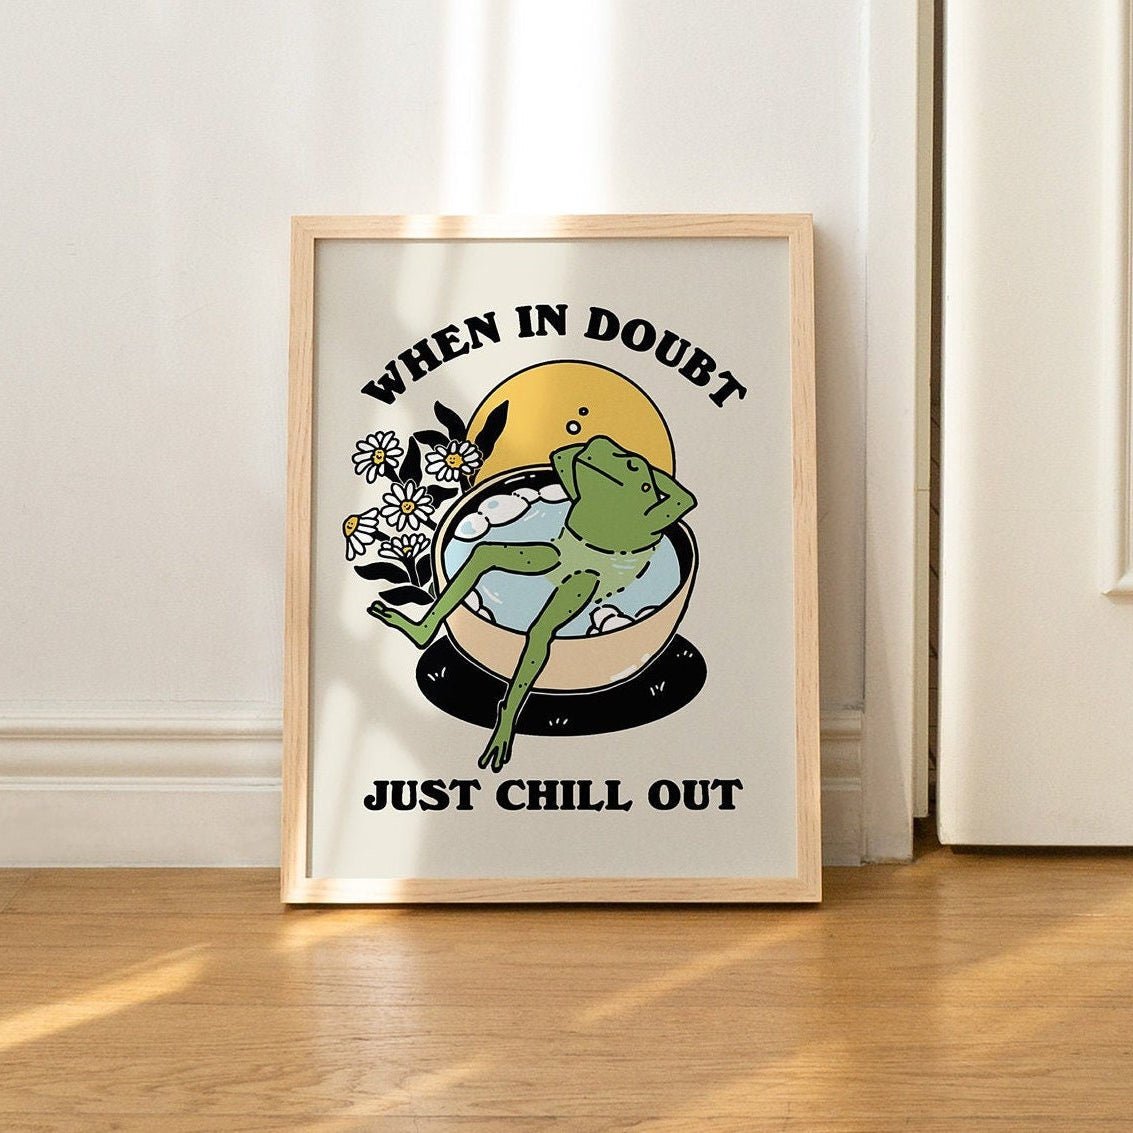 'When In Doubt' Chill Frog Print - Art Prints - Kinder Planet Company